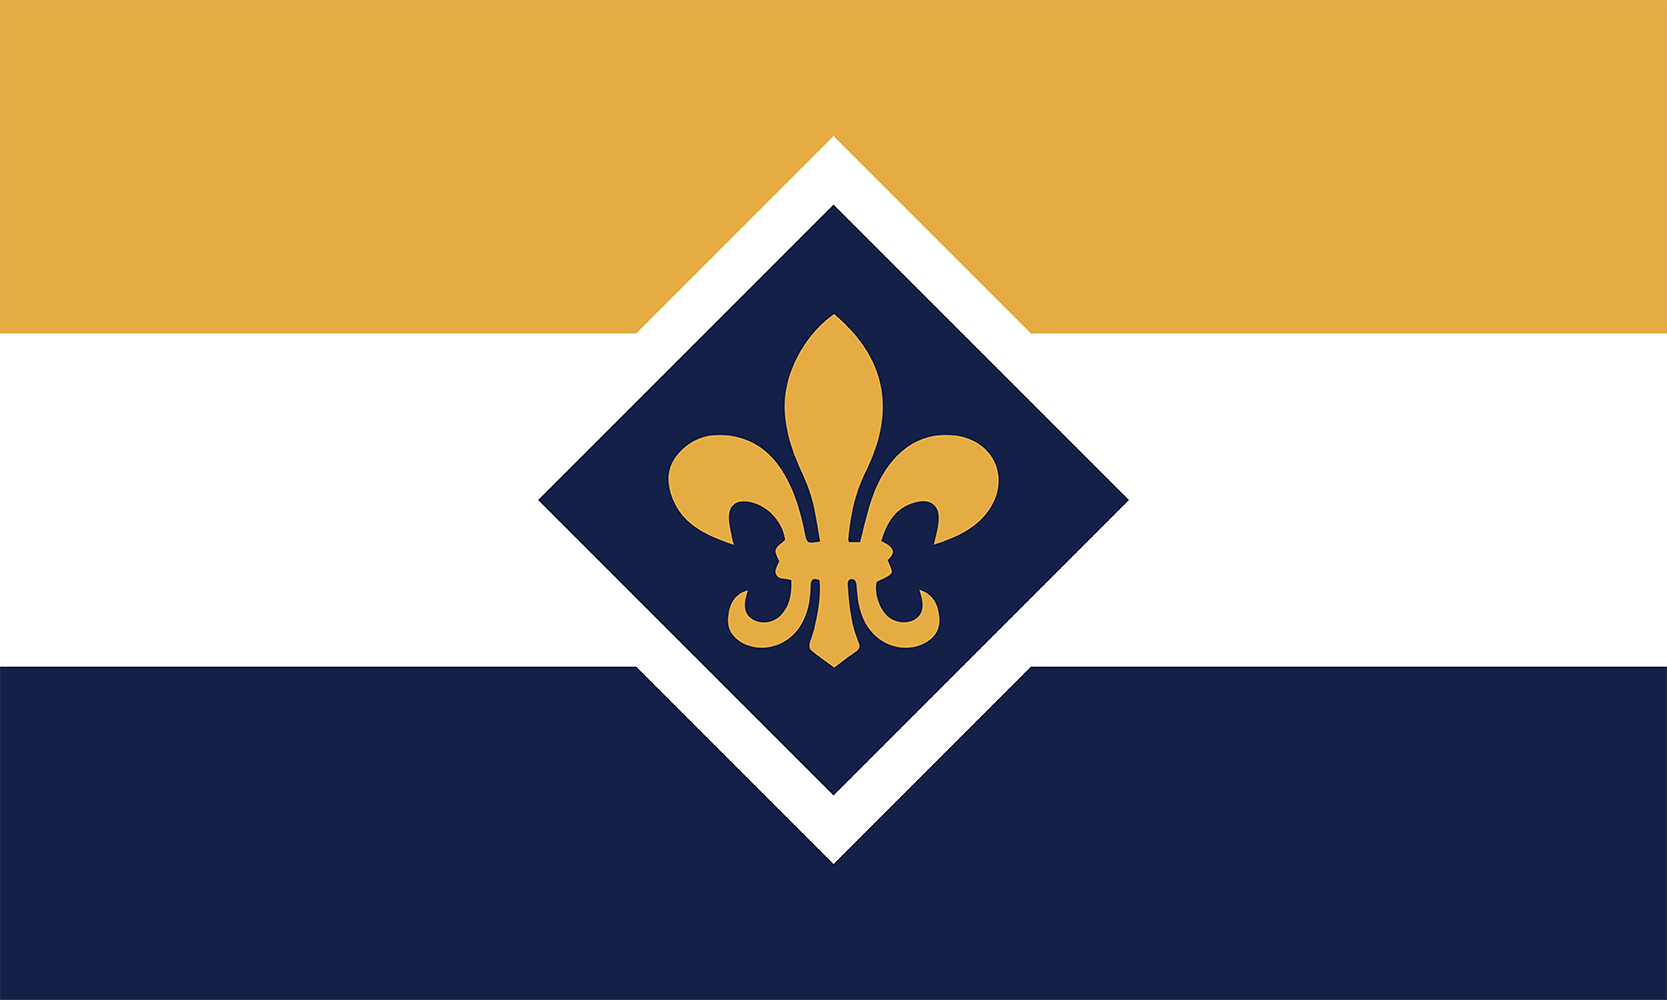 A design proposal for a new state flag for Minnesota: a symmetrical, rectangular, navy blue field containing a gold, eight-pointed star and white horizontals near the top and bottom.